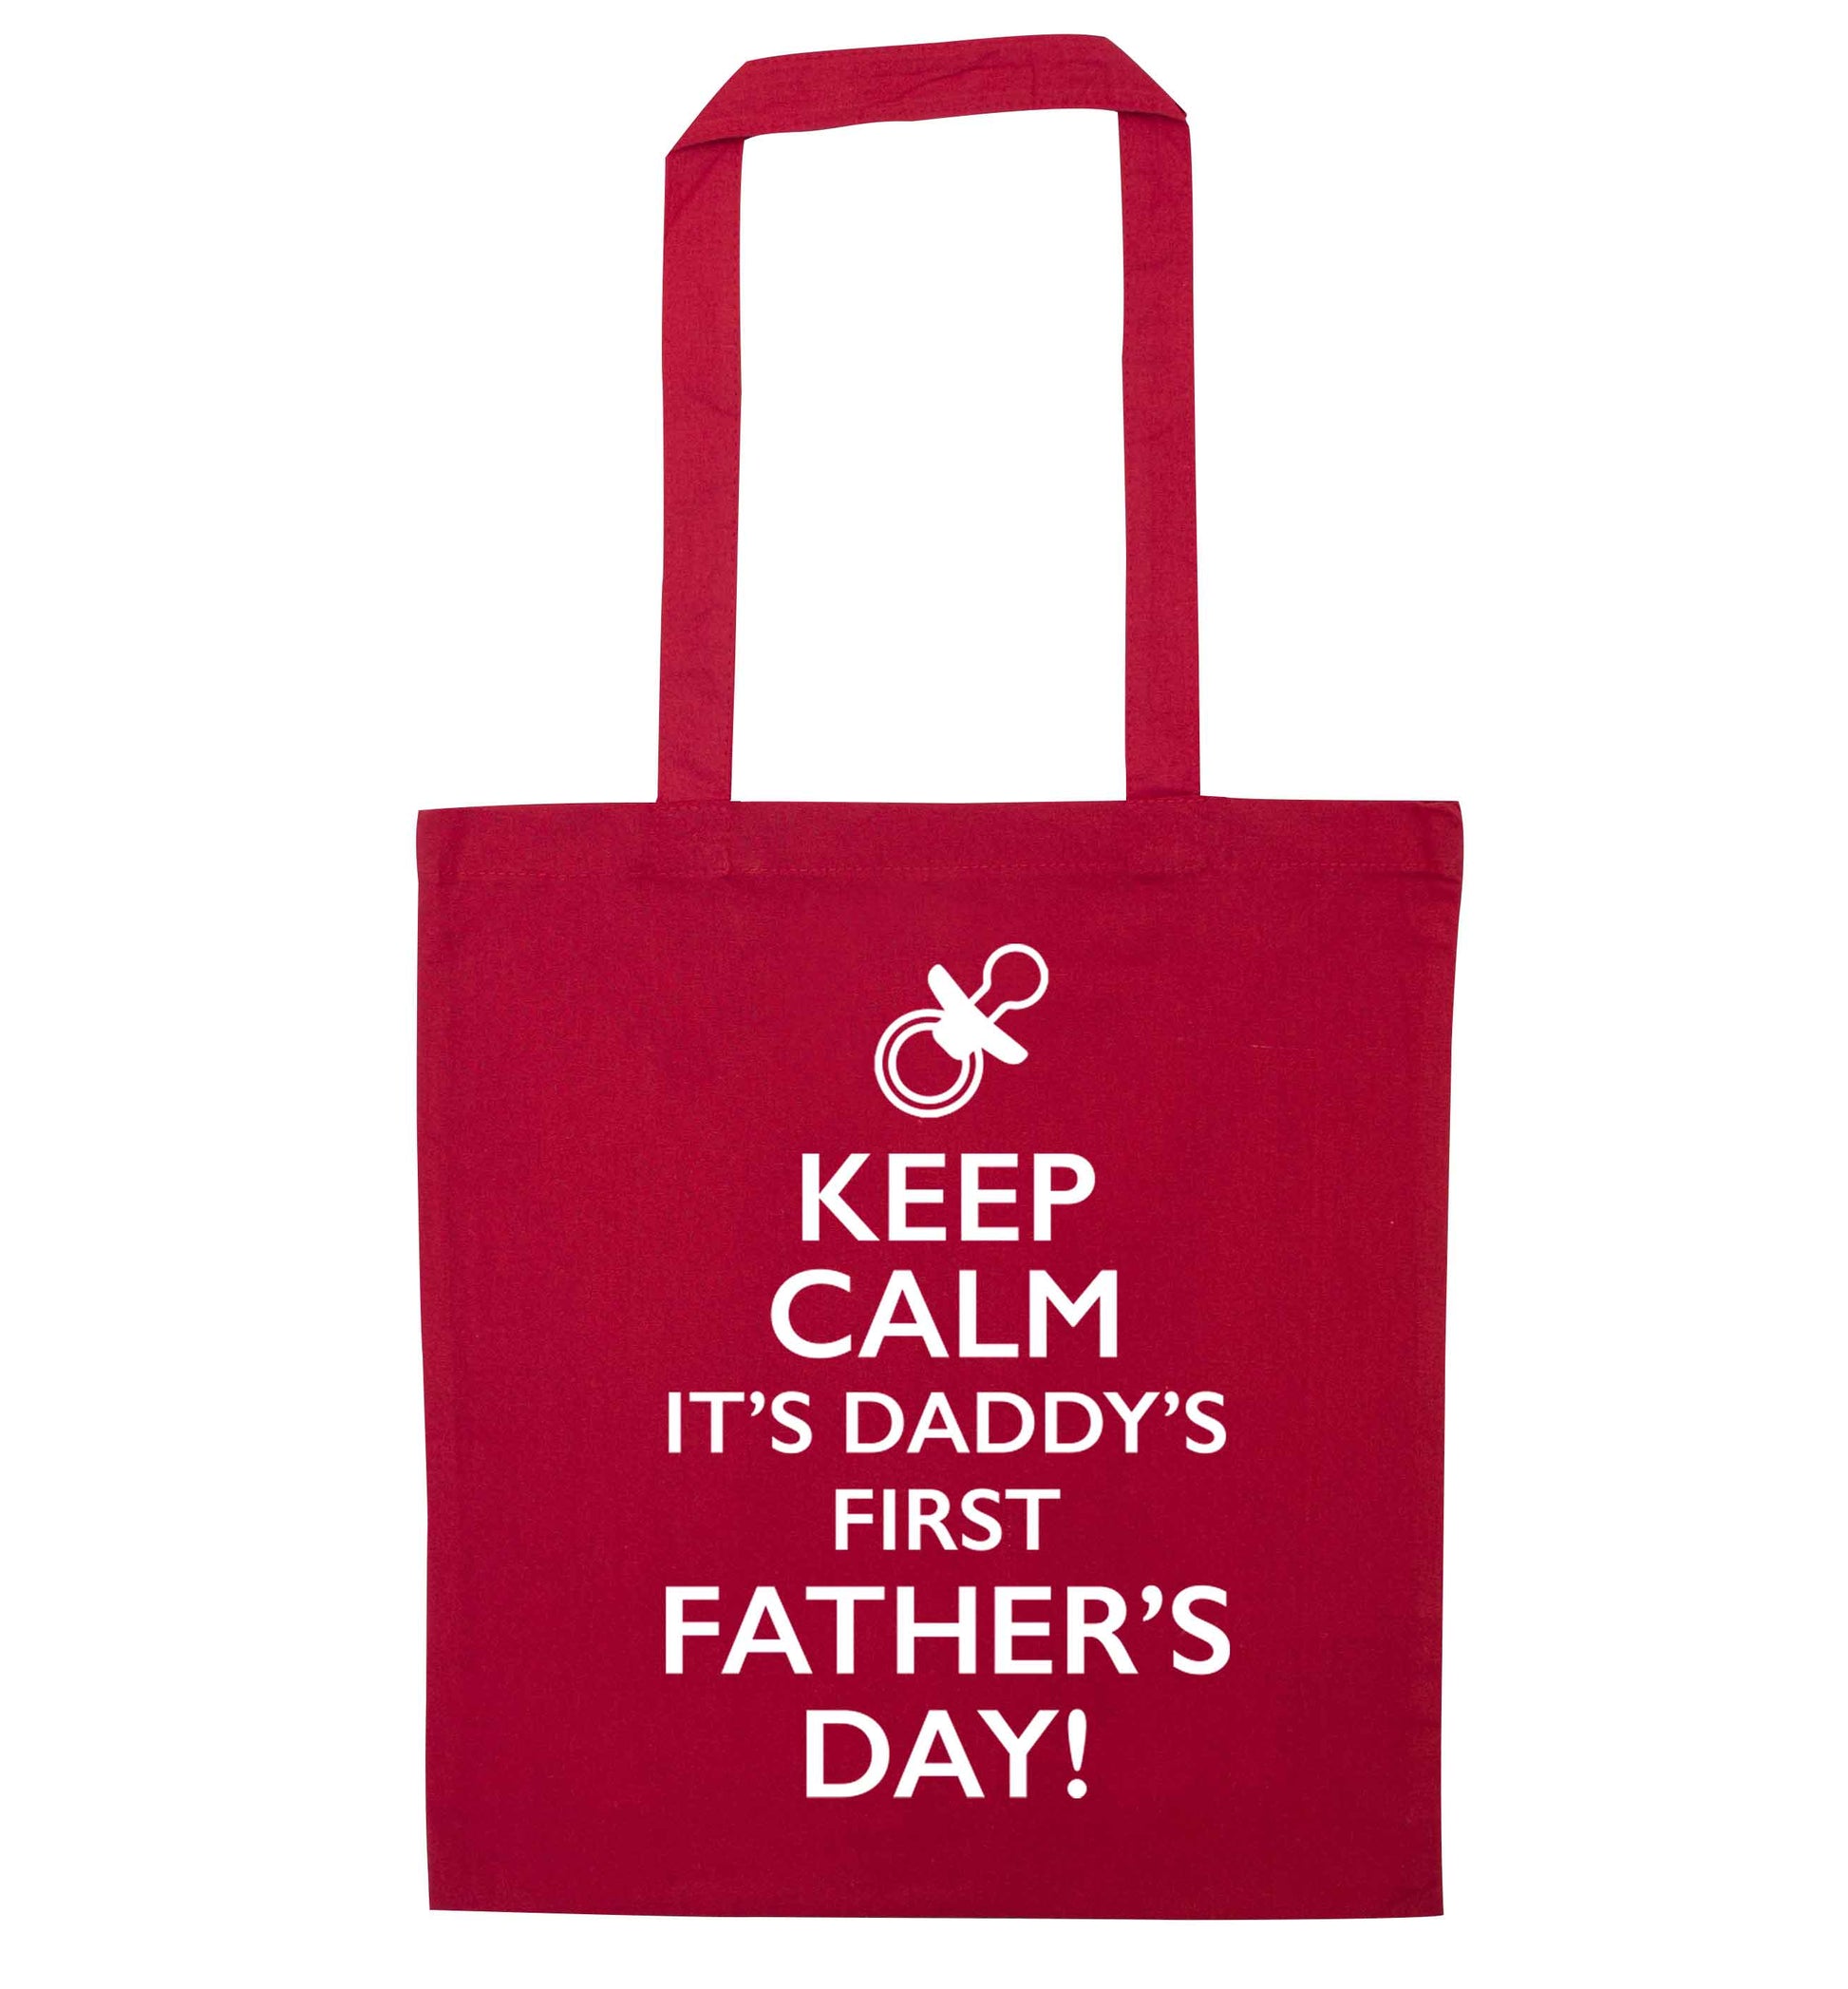 Keep calm it's daddys first father's day red tote bag